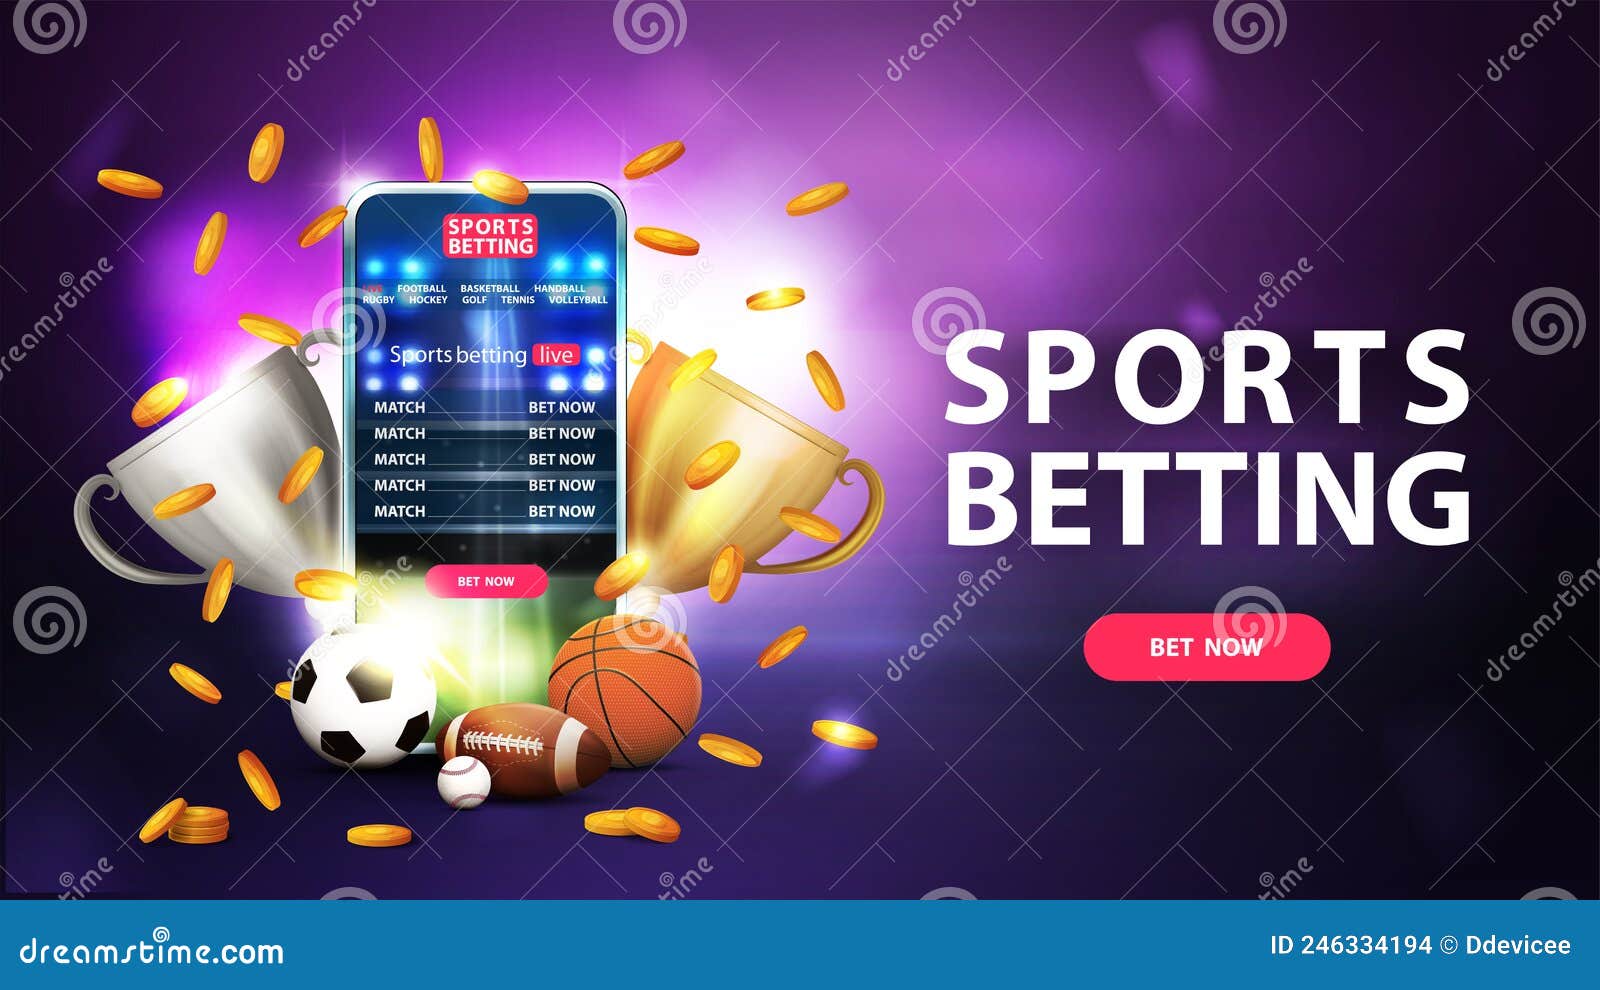 Big Boss Bet Review - A Trusted Judi Bola Site